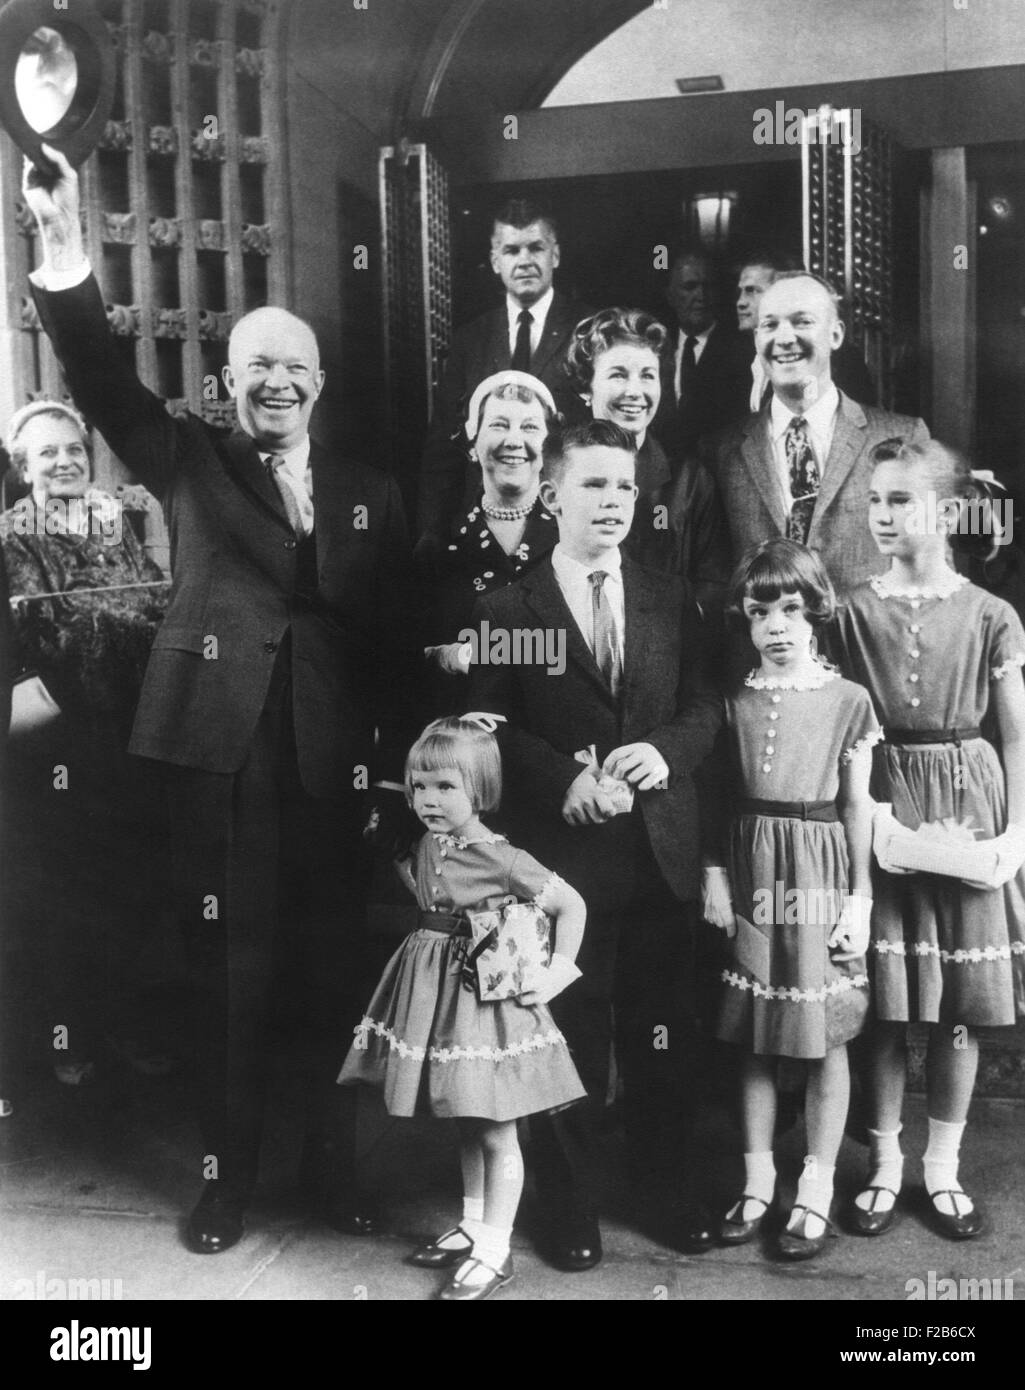 President and Mamie Eisenhower with their son John, his wife Barbara and four children leaving church. Ca. 1958. L-R: The President, Mary Jean, Mamie, David, Barbara, John, Susan, and Barbara Ann. - (BSLOC 2014 16 105) Stock Photo